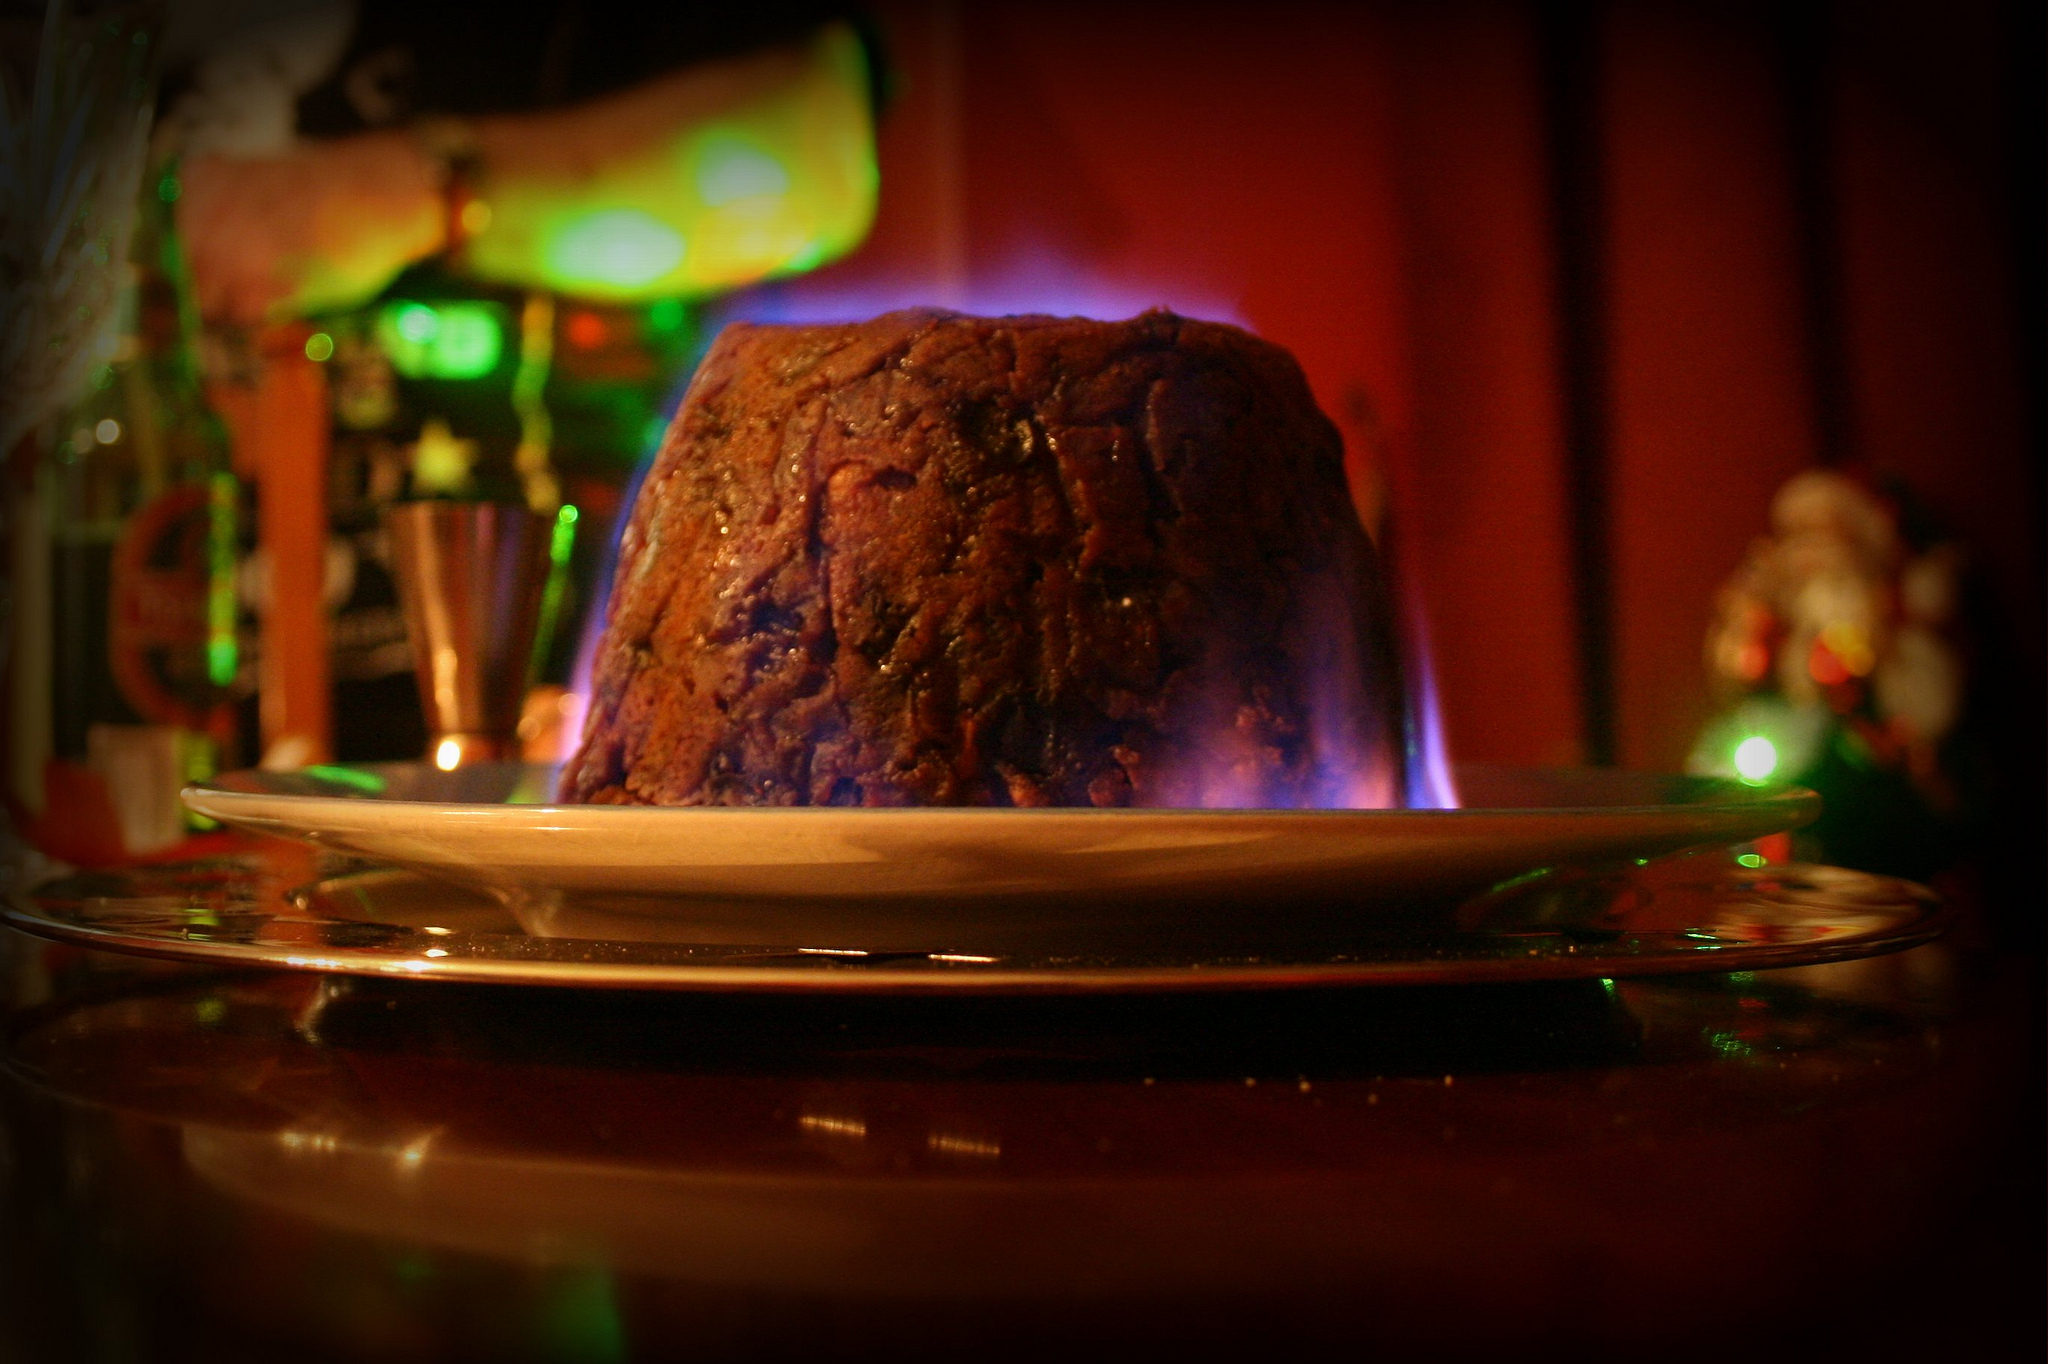 Photo of Christmas pudding by Pete, licensed under CC BY 2.0